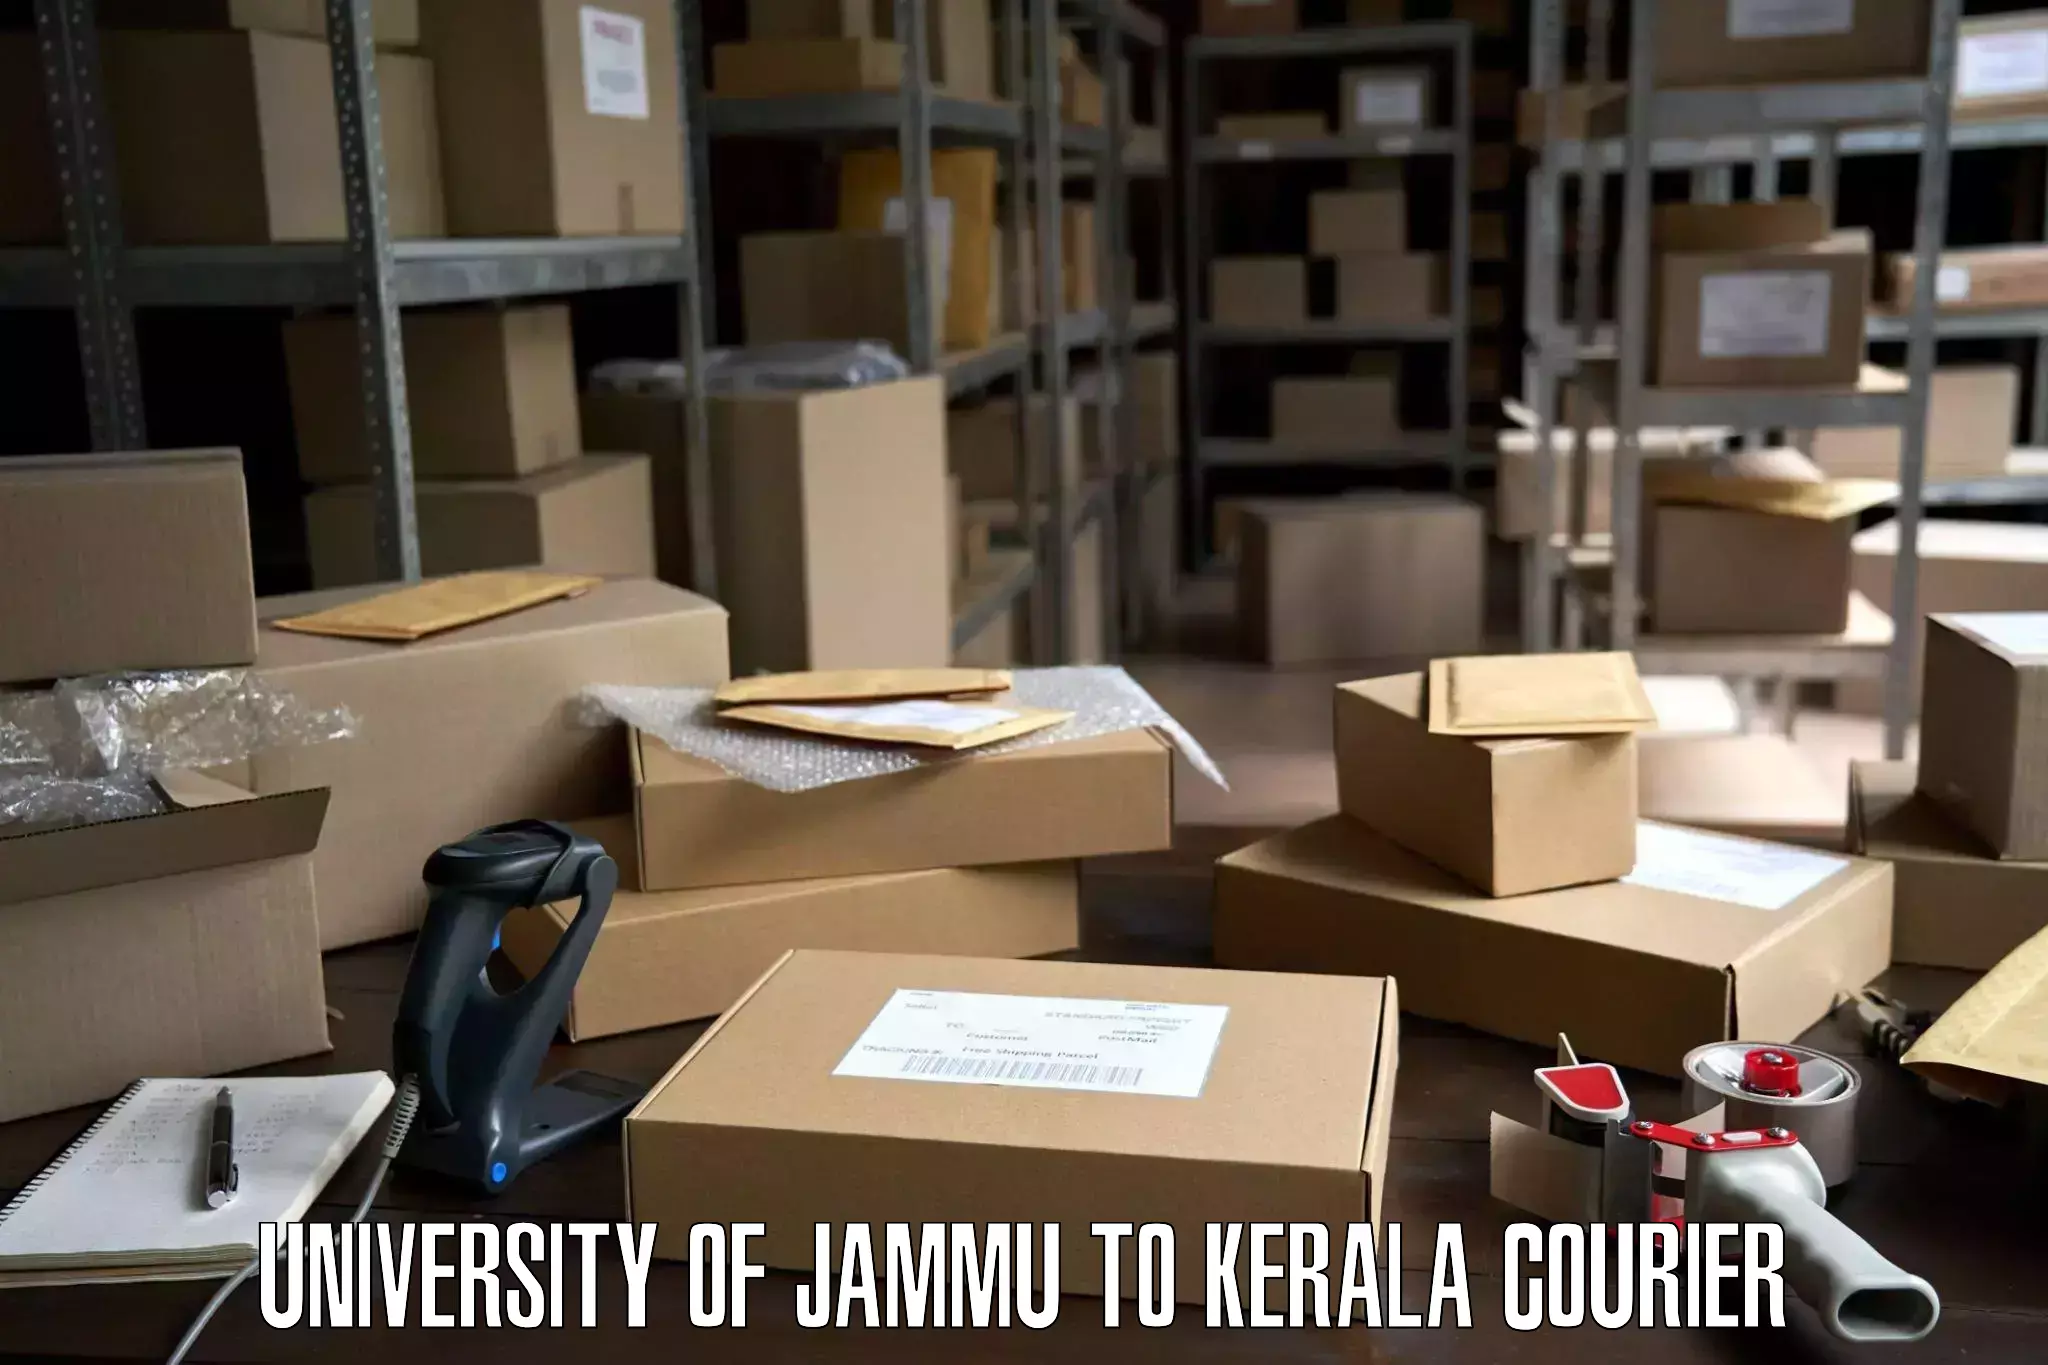 Efficient packing and moving University of Jammu to Kerala